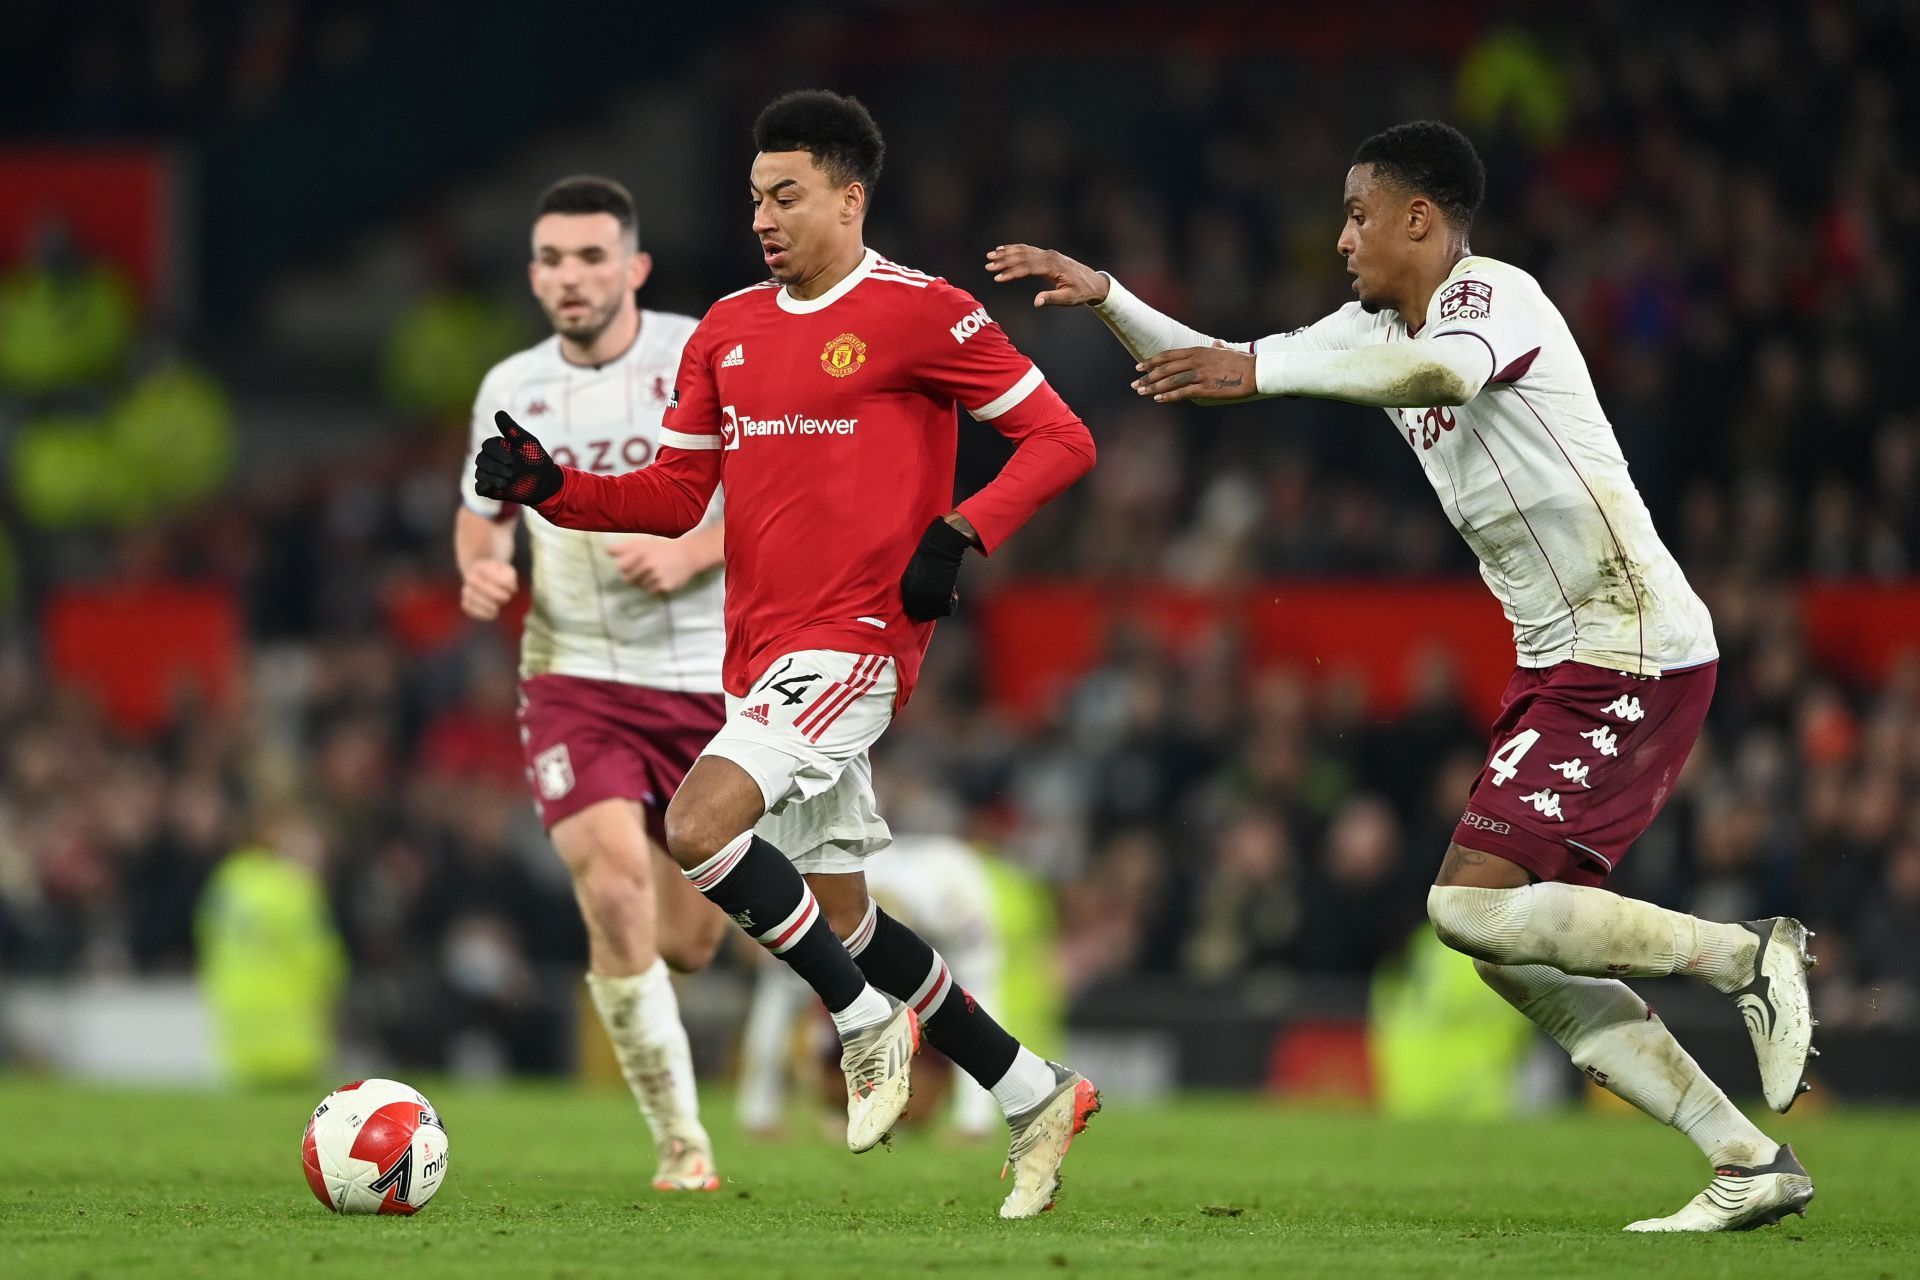 Jesse Lingard in action v Aston Villa: The Emirates FA Cup Third Round